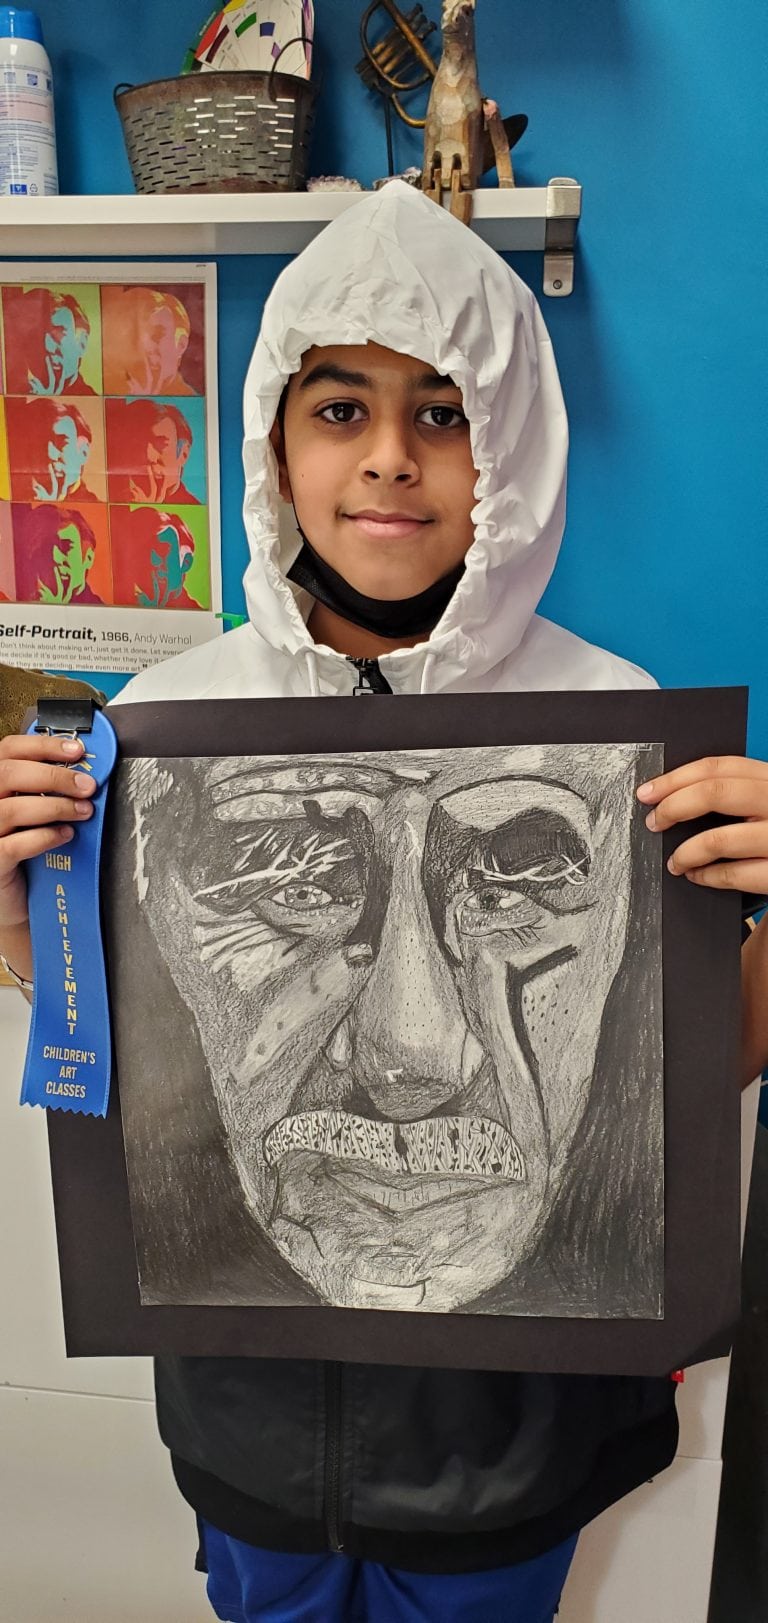 Young boy holding charcoal drawing portrait with a blue ribbon award